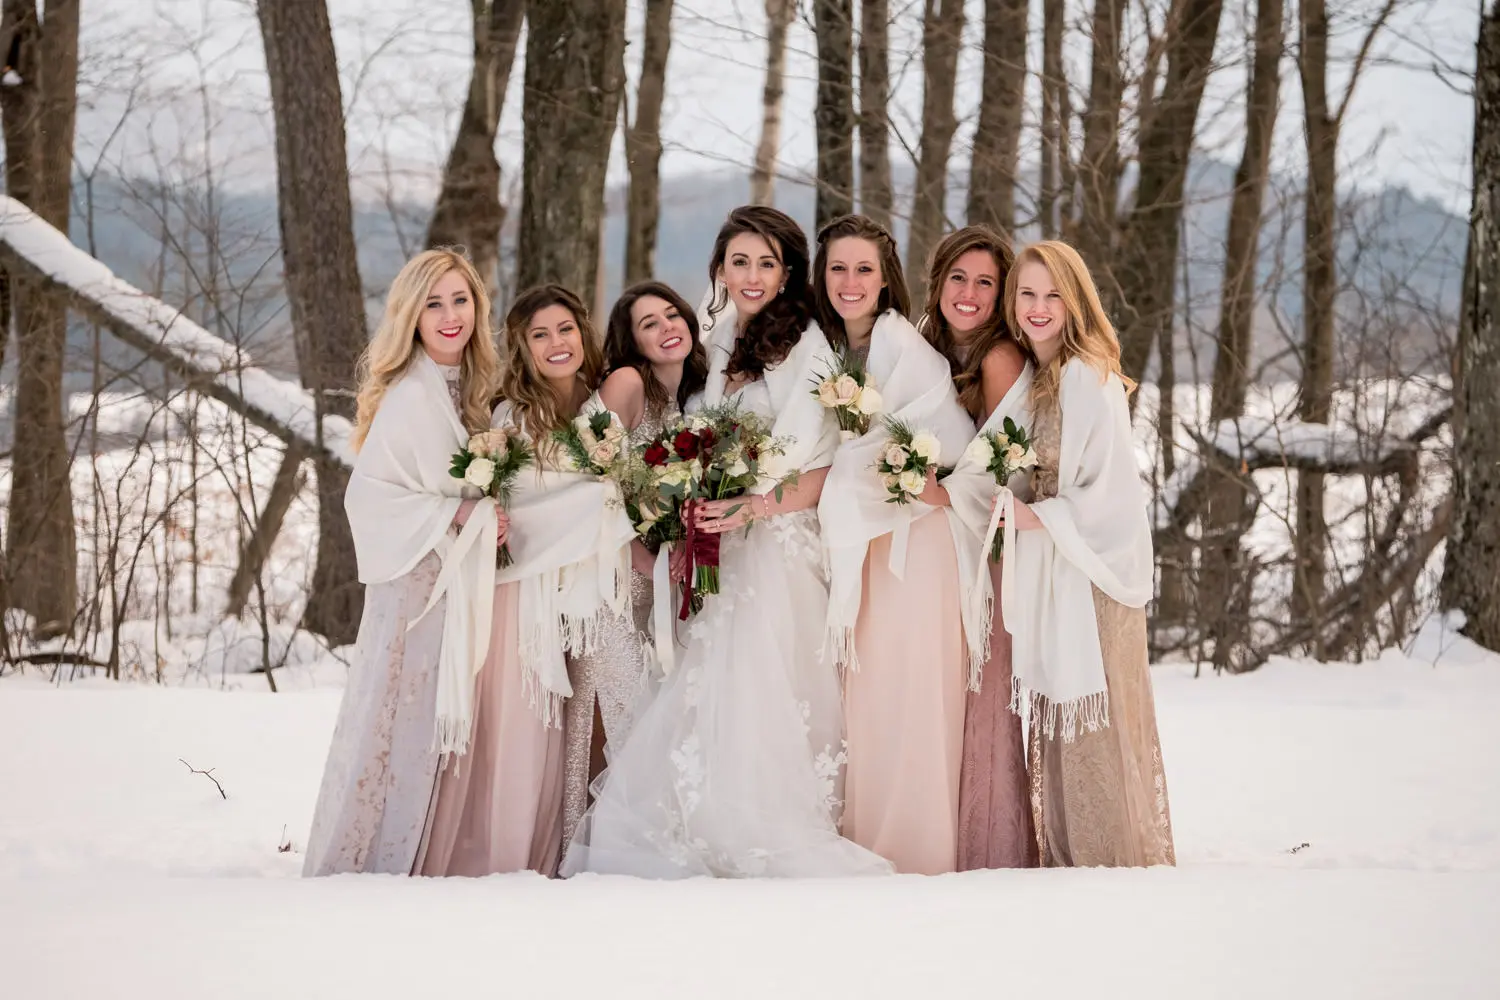 Winter Wedding Packages and Pricing at Celebrations on the River La Crosse, WI for Winter Weddings, Winter Wedding Venue Pricing and Packages